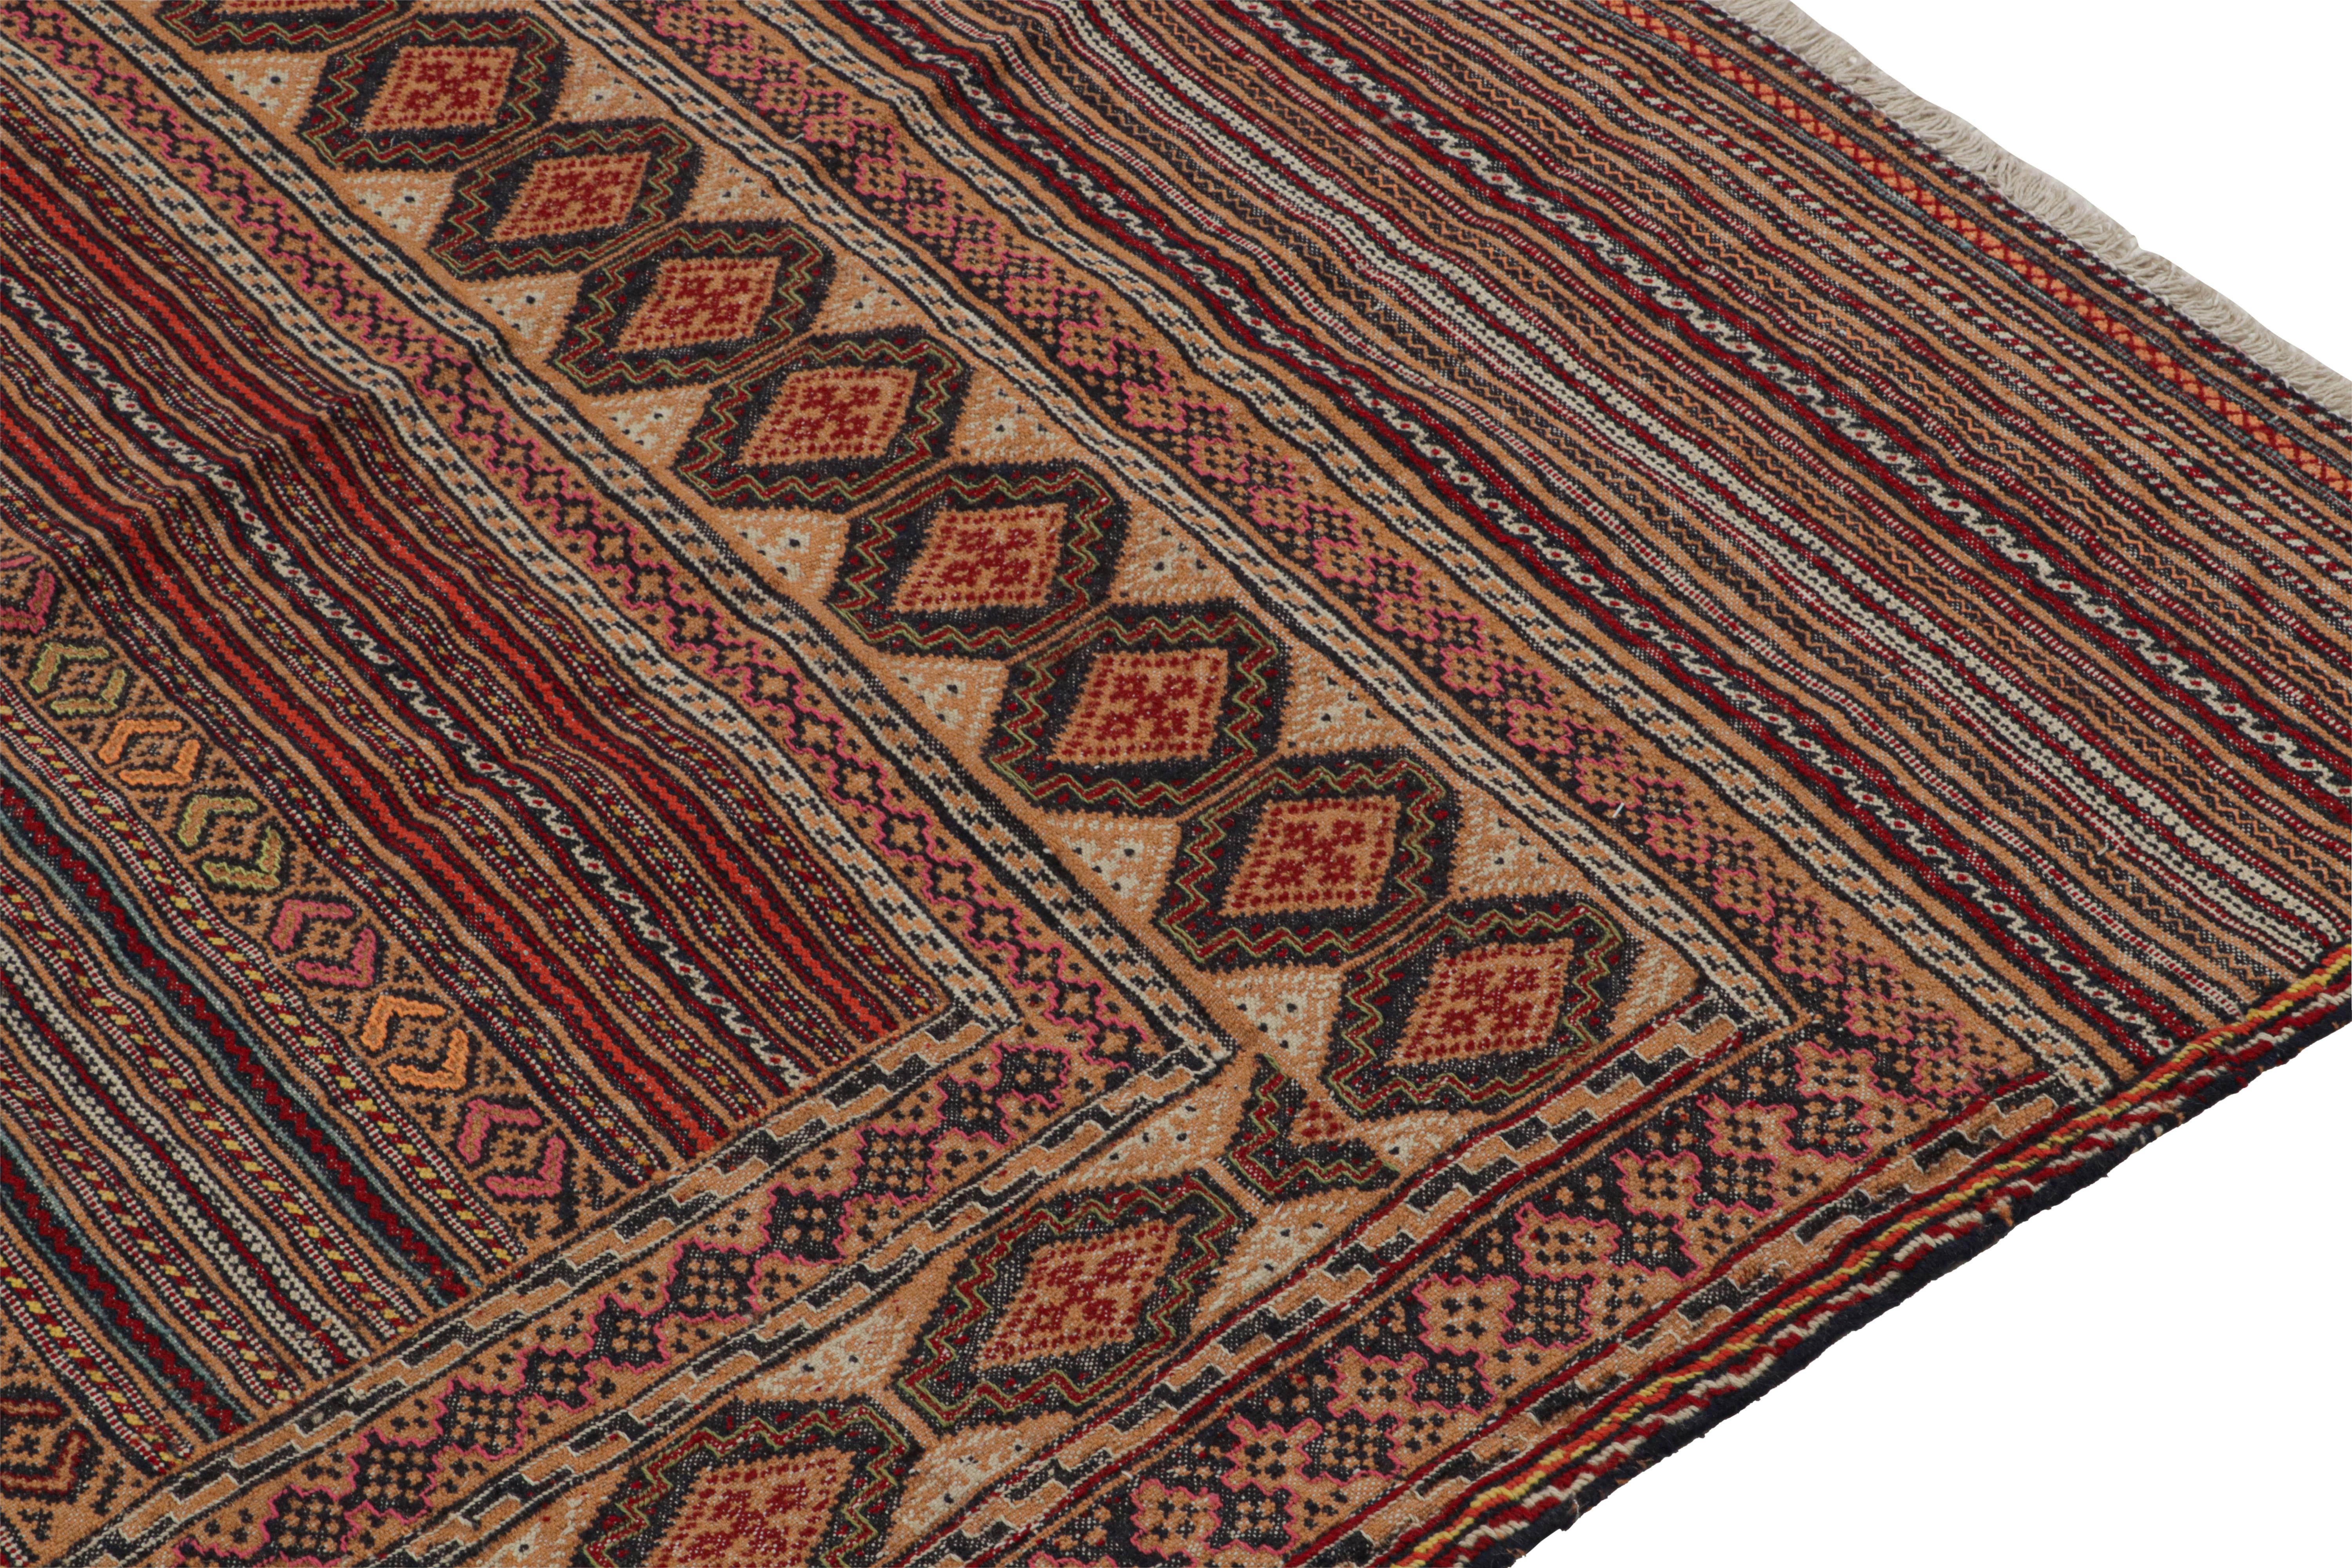 Hand-Woven Vintage Baluch Kilim in Beige-Brown with Geometric Patterns, from Rug & Kilim For Sale